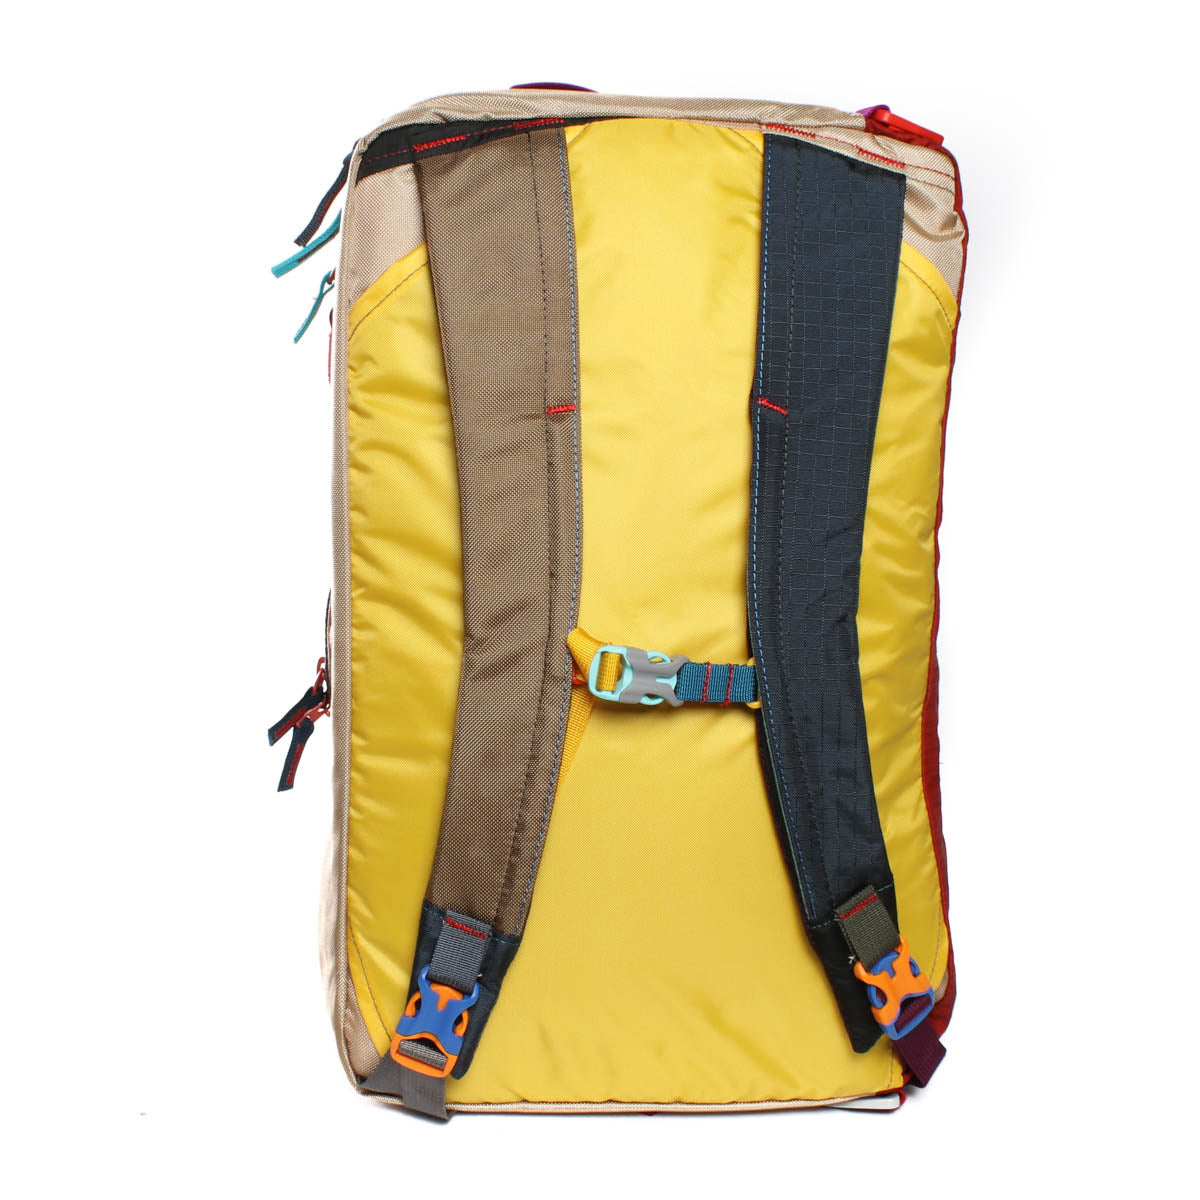 Cotopaxi Tasra 16L Backpack One-of-a-kind Del Dia Colorway